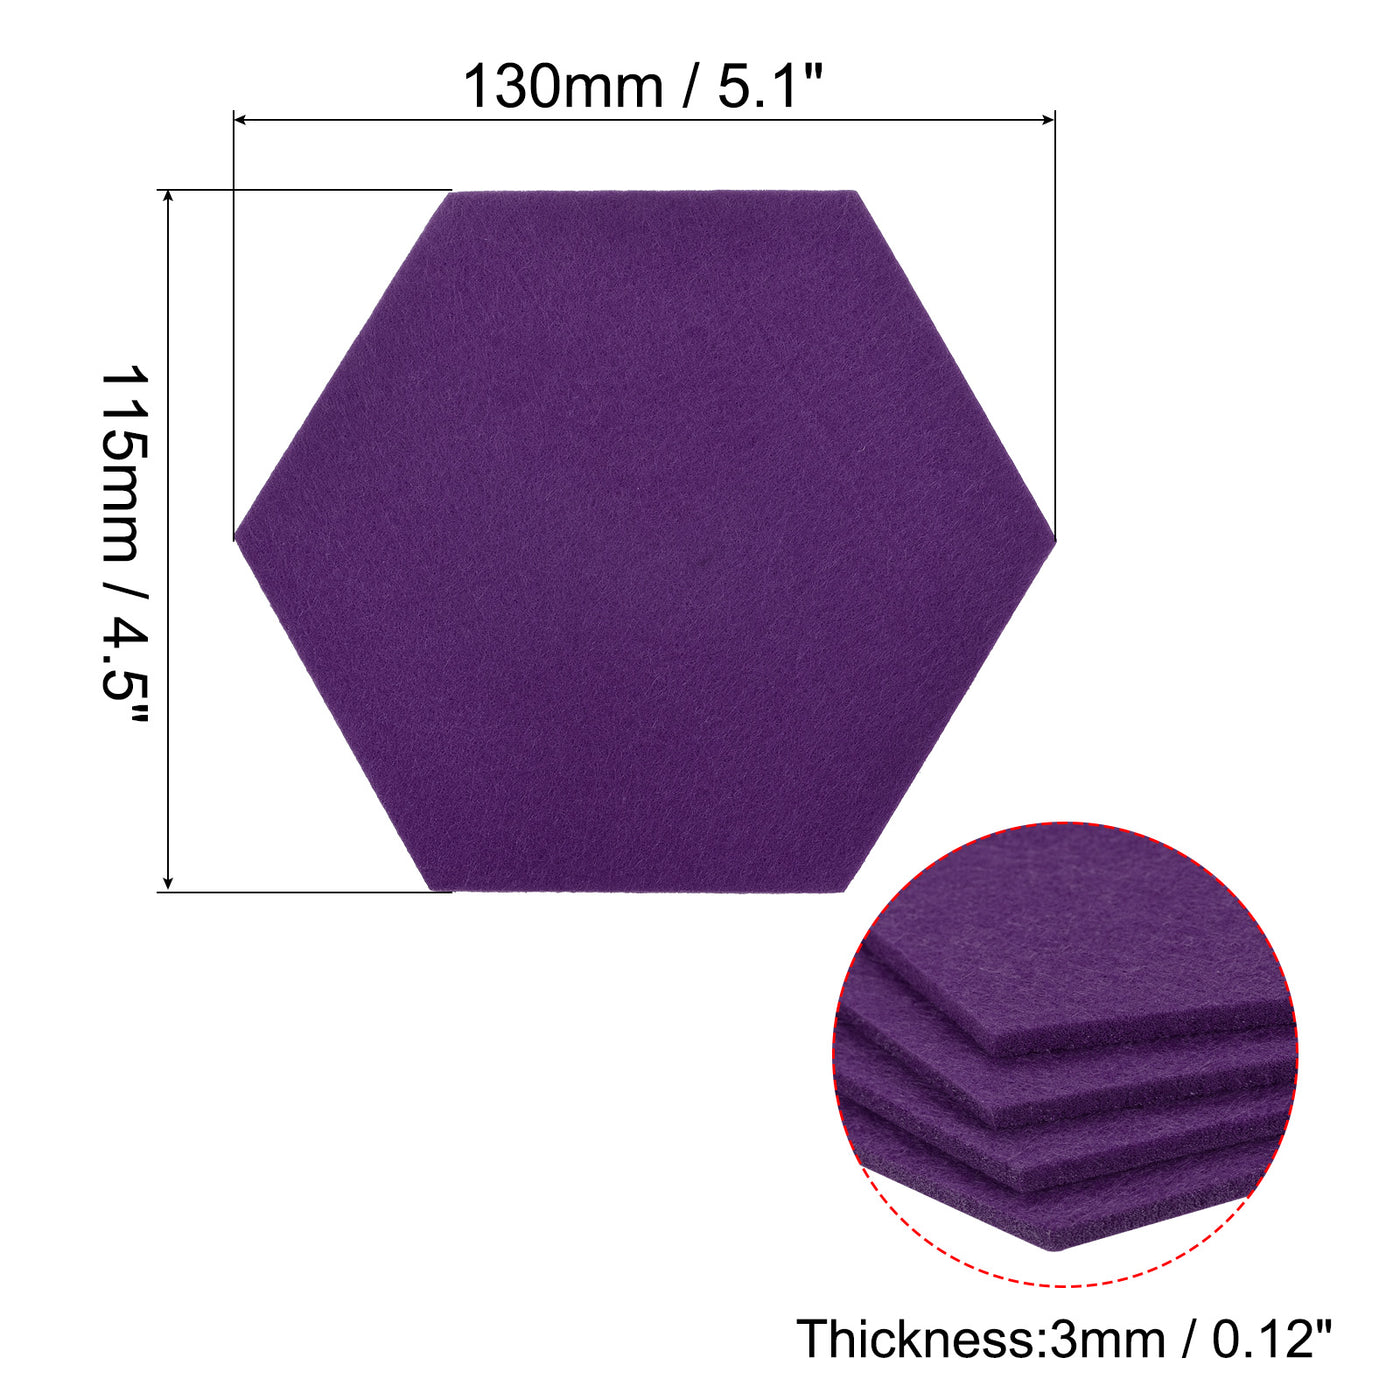 uxcell Uxcell Felt Coasters 9pcs Absorbent Pad Coaster for Drink Cup Pot Bowl Vase Purple